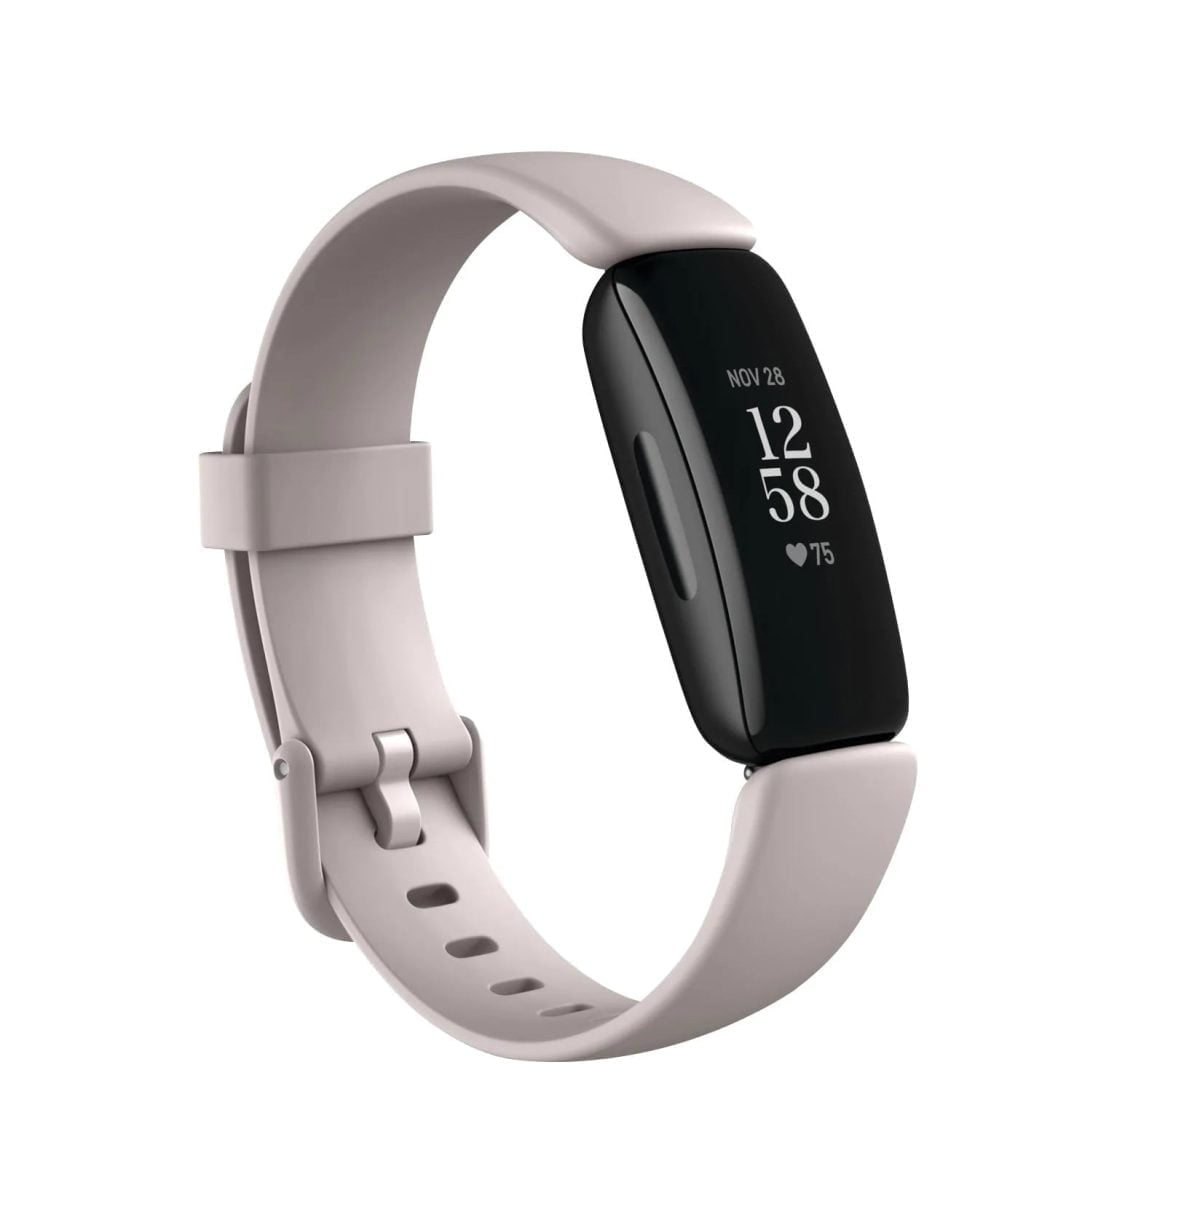 6425995 Rd Fitbit &Amp;Lt;Div Class=&Amp;Quot;Long-Description-Container Body-Copy &Amp;Quot;&Amp;Gt; &Amp;Lt;Div Class=&Amp;Quot;Html-Fragment&Amp;Quot;&Amp;Gt; &Amp;Lt;Div&Amp;Gt; &Amp;Lt;Div&Amp;Gt; &Amp;Lt;H1&Amp;Gt;Fitbit Inspire 2 Fitness Tracker - Lunar White&Amp;Lt;/H1&Amp;Gt; &Amp;Lt;/Div&Amp;Gt; &Amp;Lt;Div&Amp;Gt;Make Healthy A Habit With Fitbit Inspire 2.  This Easy-To-Use Fitness Tracker Packs 24/7 Heart Rate, Active Zone Minutes, Activity And Sleep Tracking, Up To 10 Days Of Battery And More--Paired With Step-By-Step Fitness &Amp;Amp; Nutrition Programs, Personalized Insights, And Sleep Tools From Premium, You Have All You Need For A Healthier You.&Amp;Lt;/Div&Amp;Gt; &Amp;Lt;/Div&Amp;Gt; &Amp;Lt;/Div&Amp;Gt; &Amp;Lt;/Div&Amp;Gt; Fitbit Inspire 2 Fitbit Inspire 2 Fitness Tracker - Lunar White